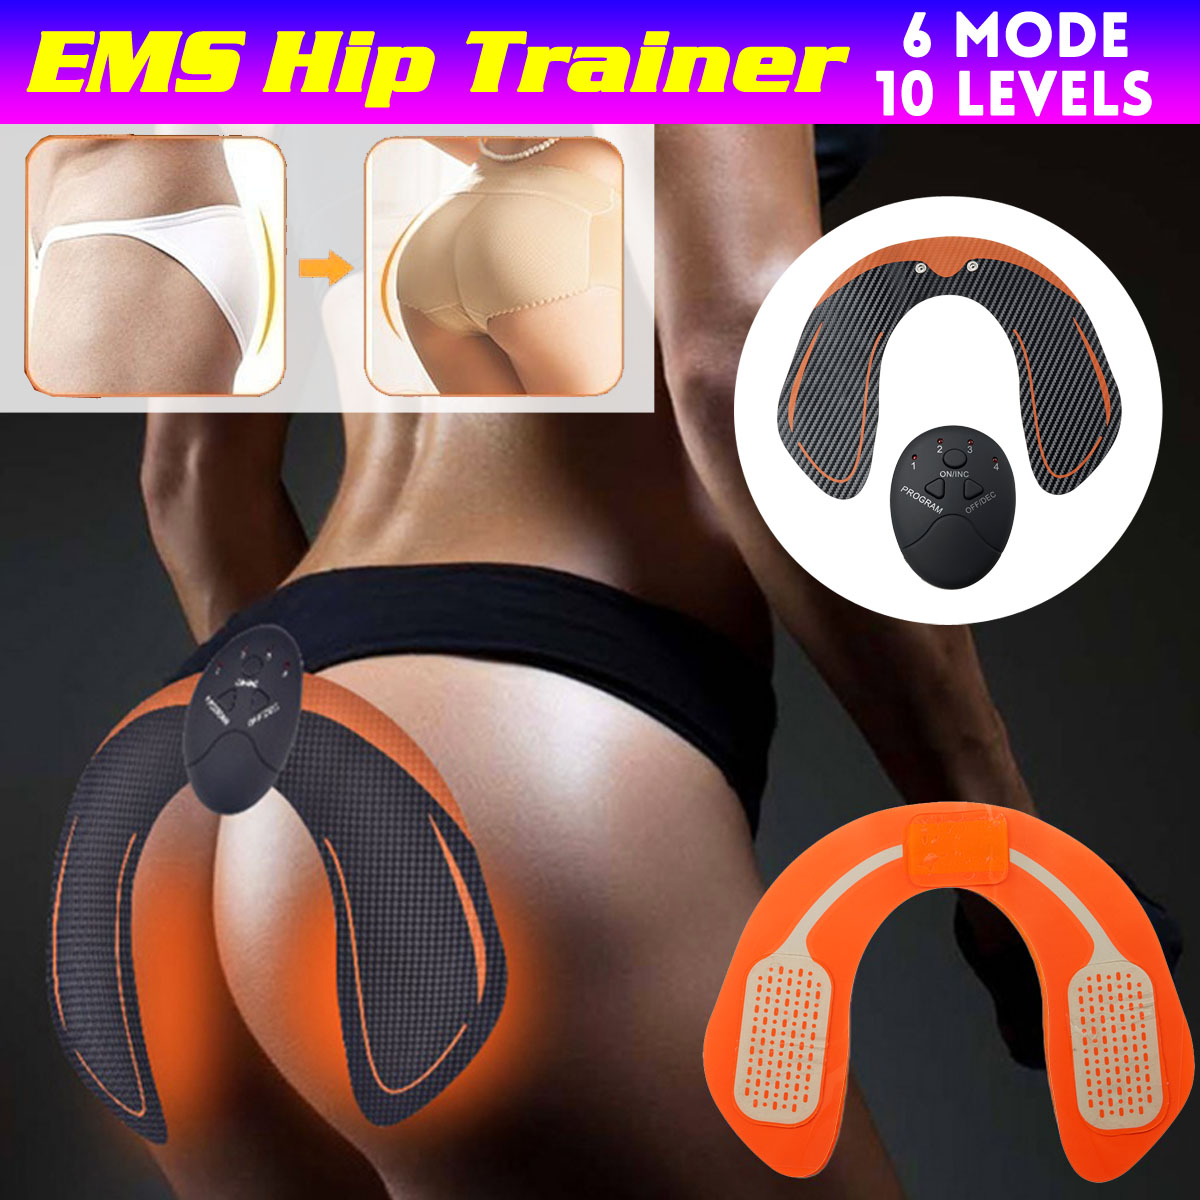 EMS-Smart-Hip-Waist-Trainer-6-Modes-10-Levels-Butt-Lifting-Muscle-Fitness-Slimming-Device-1719608-1